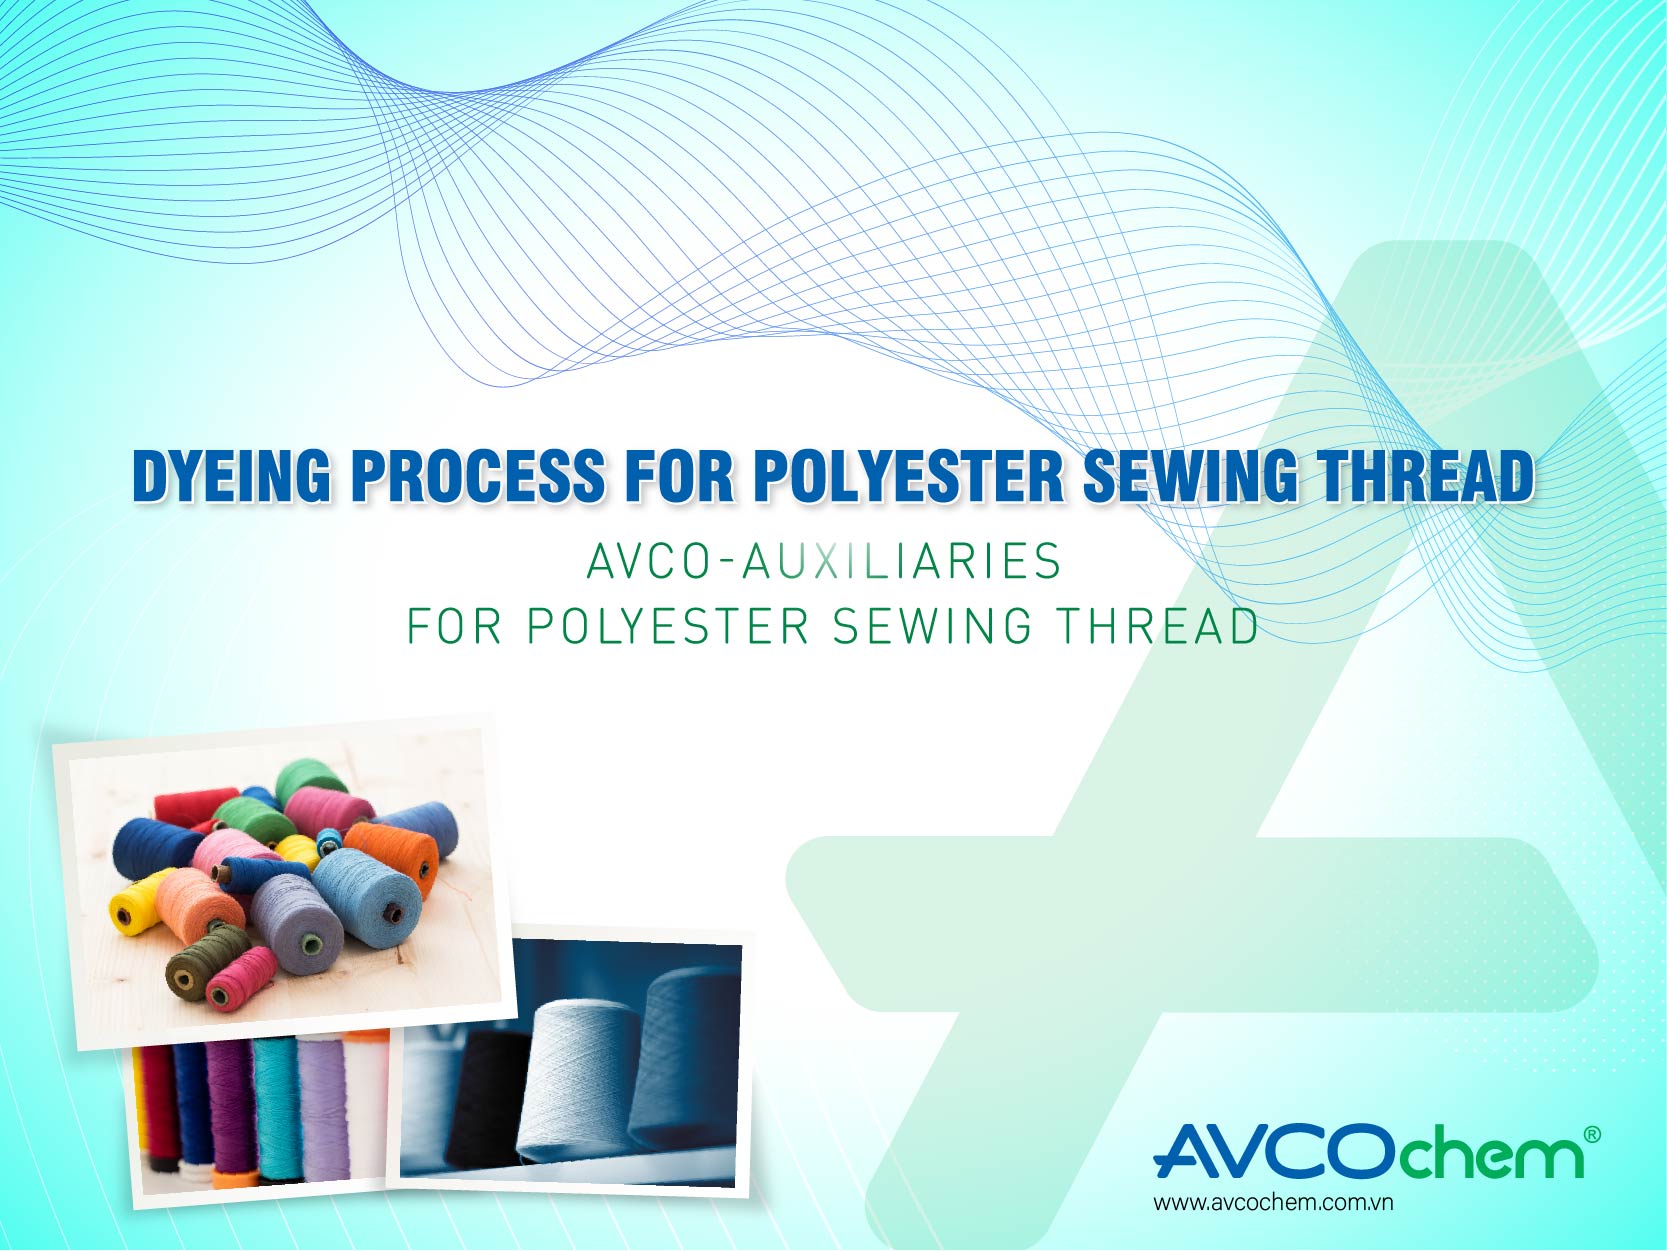 DYEING PROCESS FOR SEWING THREAD